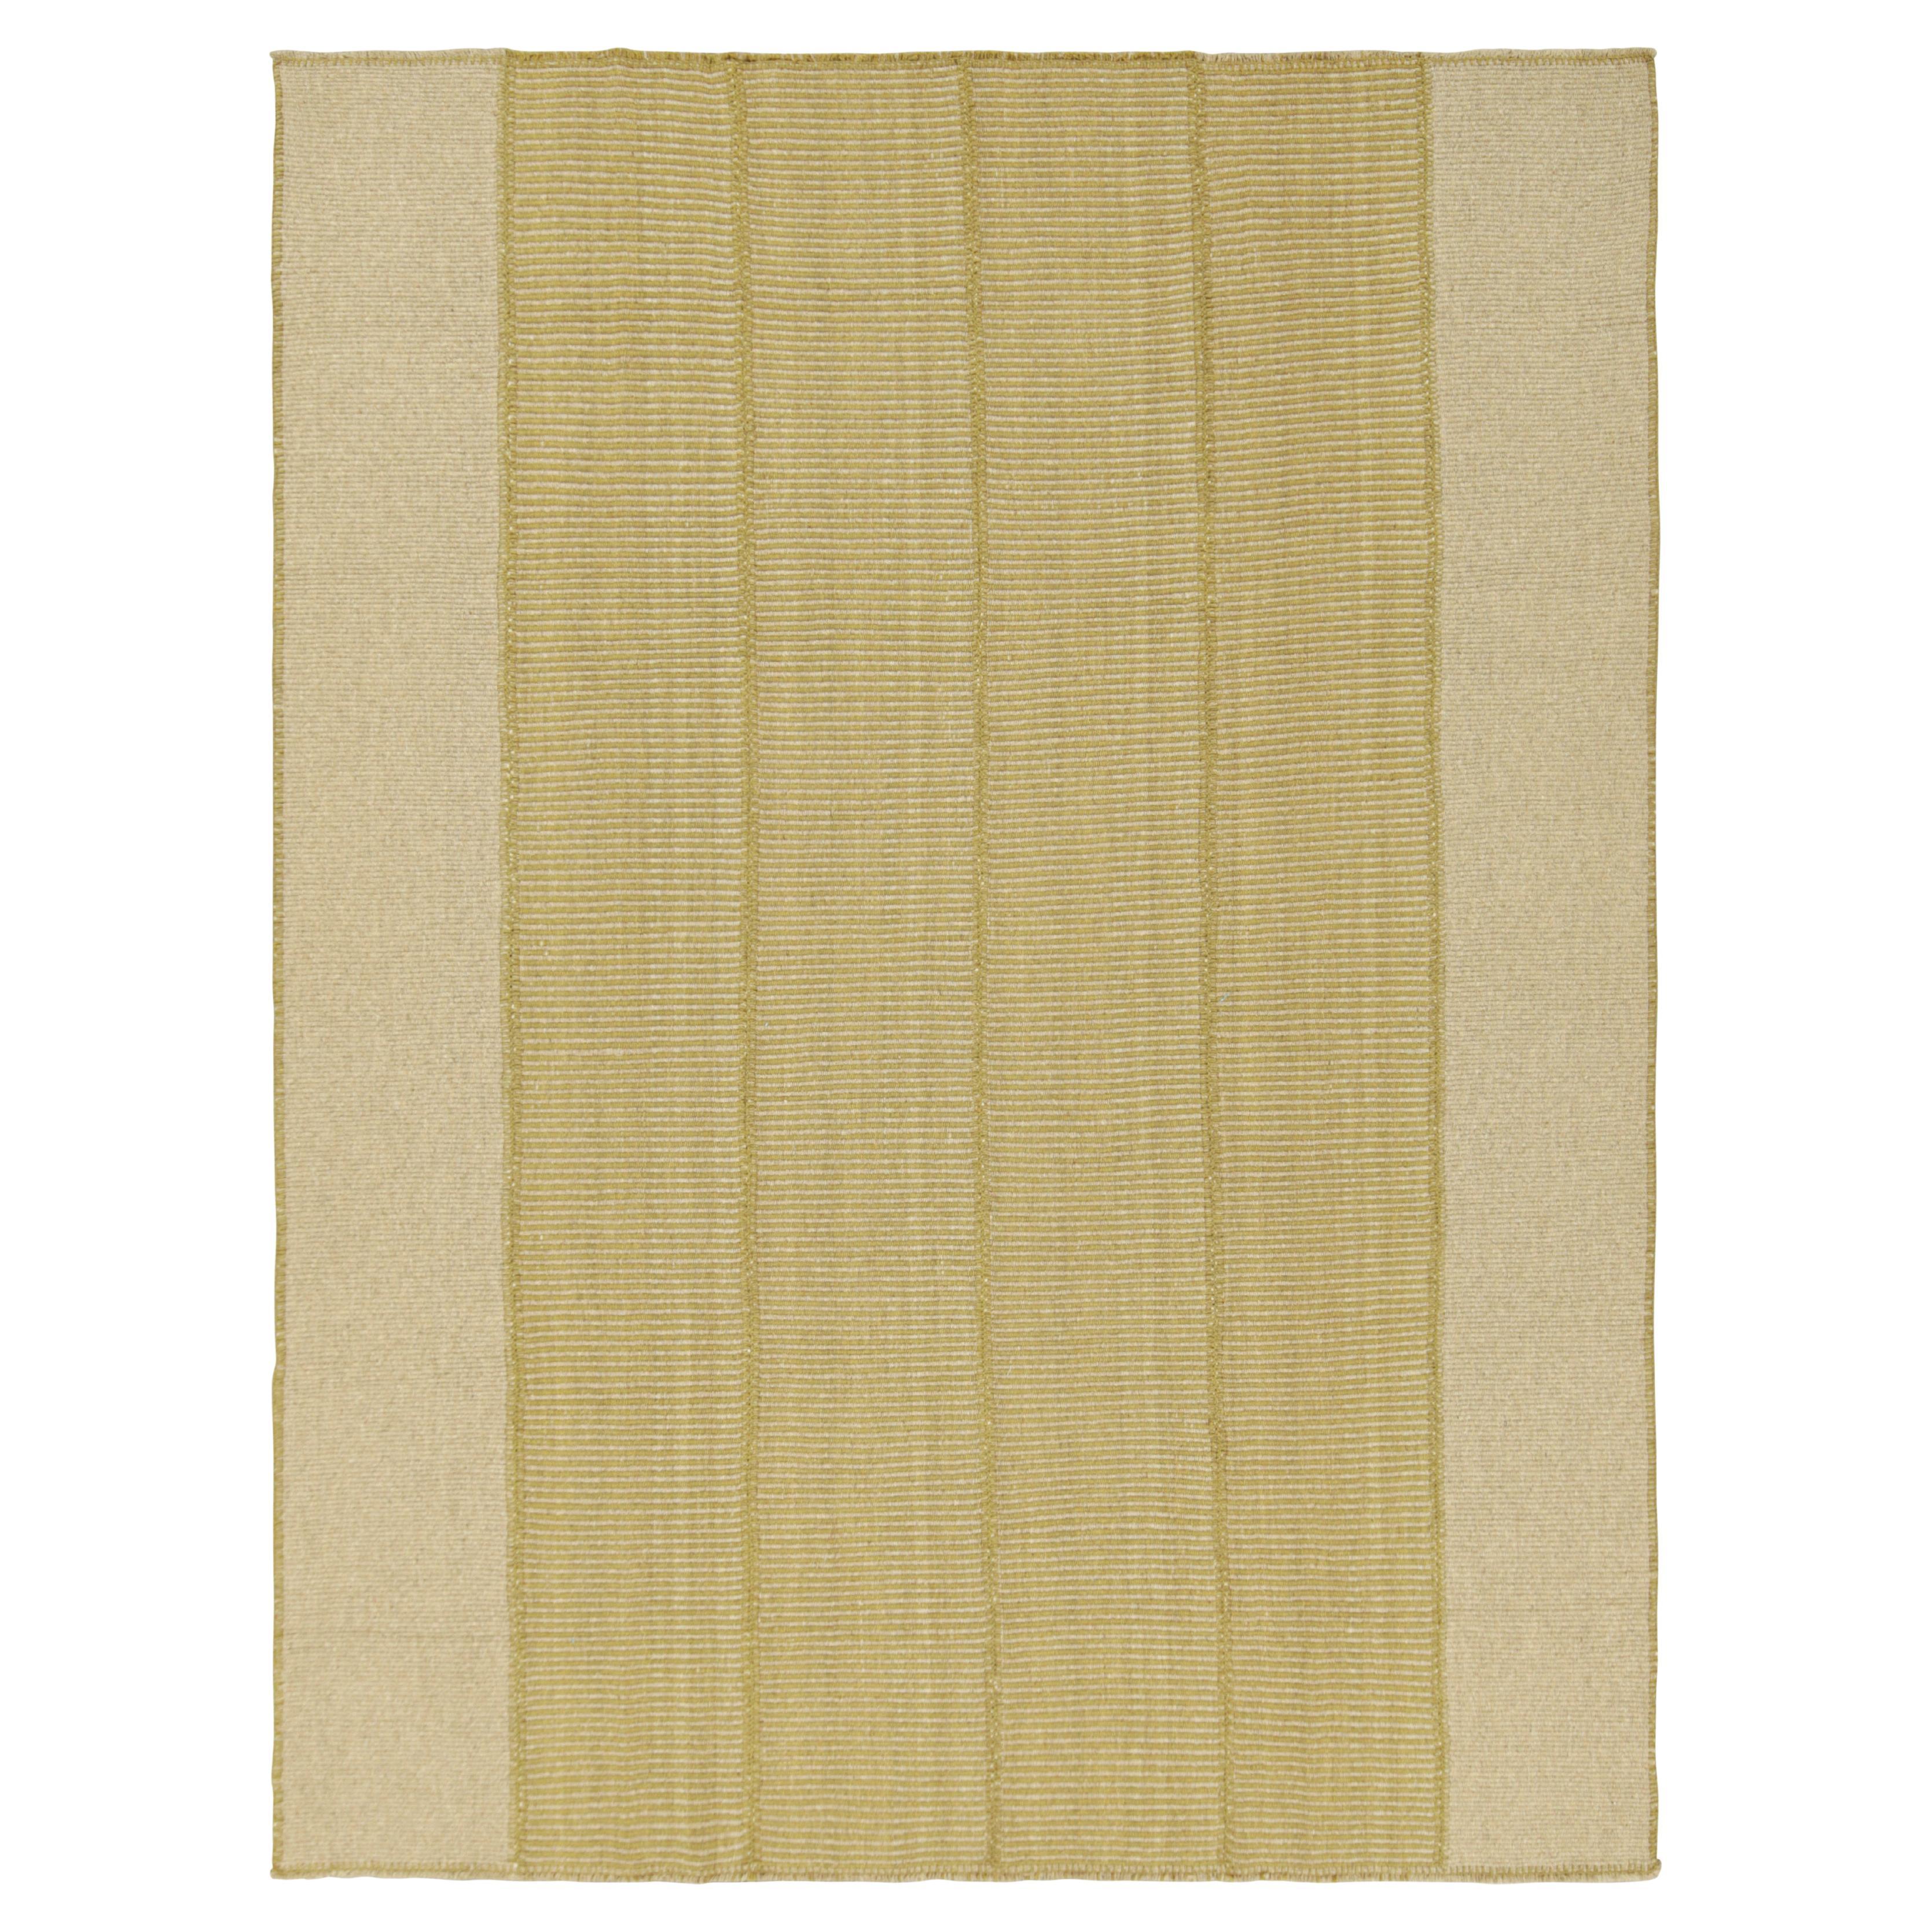 Rug & Kilim’s Contemporary Kilim in Beige and Gold Textural Stripes For Sale